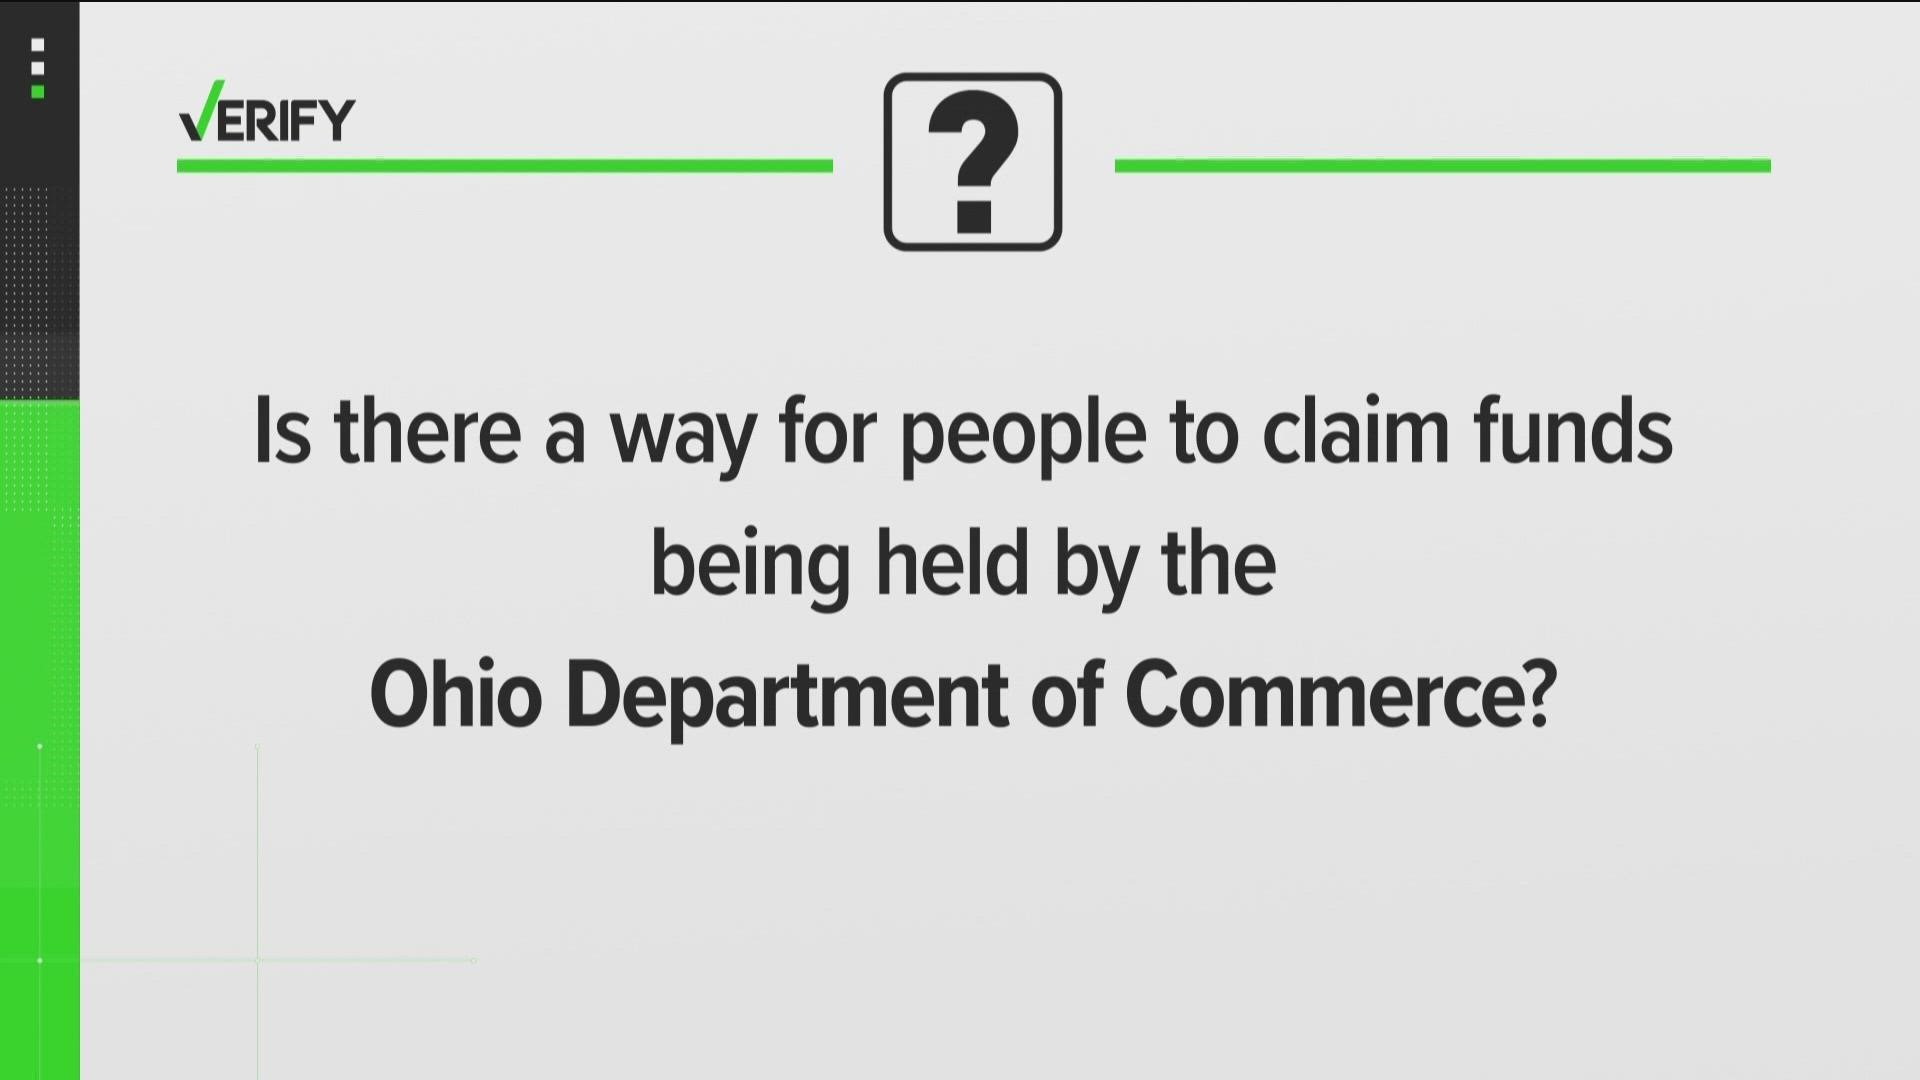 The Ohio Department of Commerce has unclaimed funds waiting to be distributed. Find out how you can claim those funds.